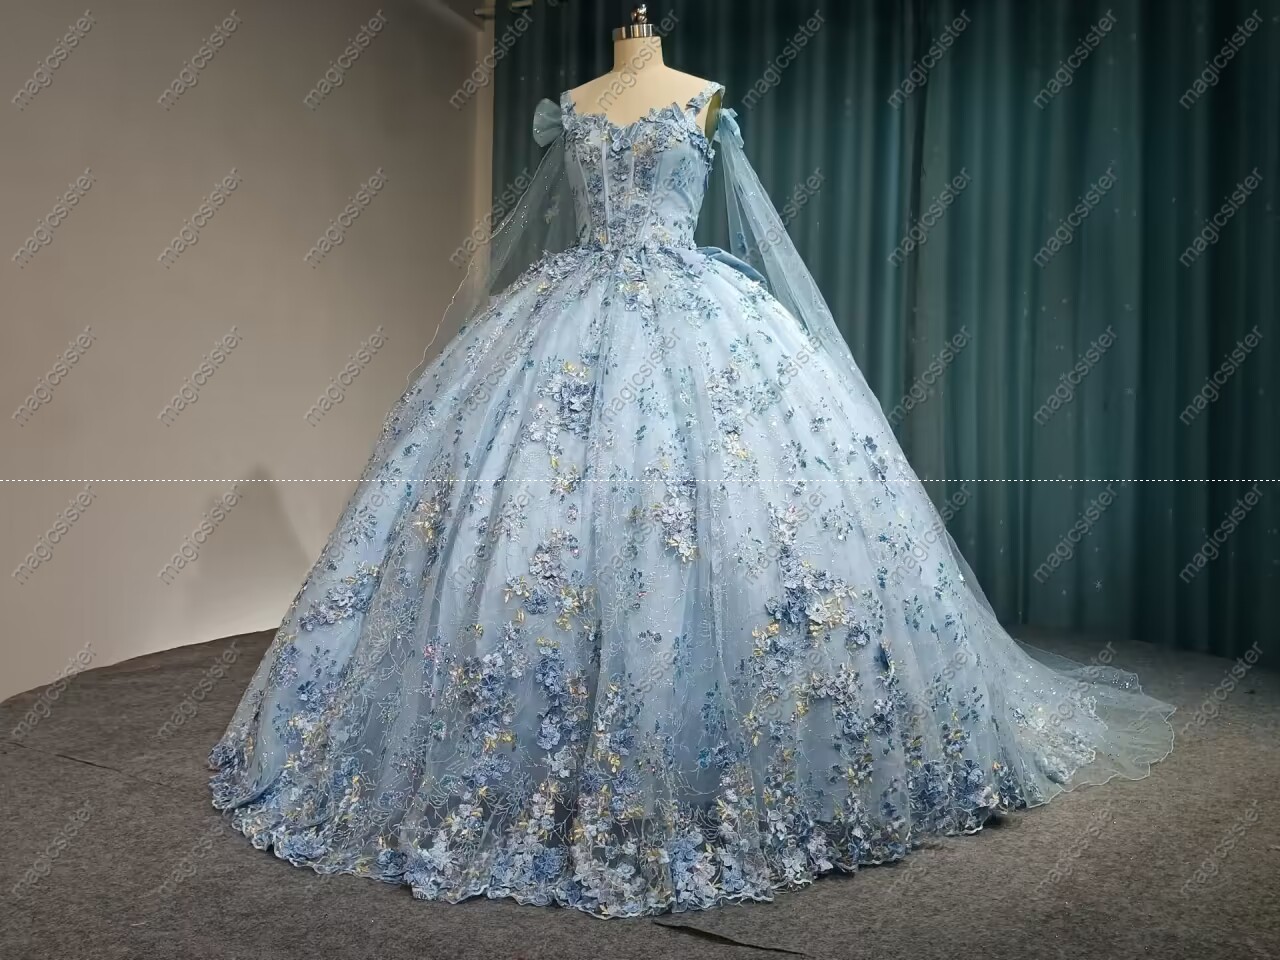 Topselling Customized Quinceanera Dress